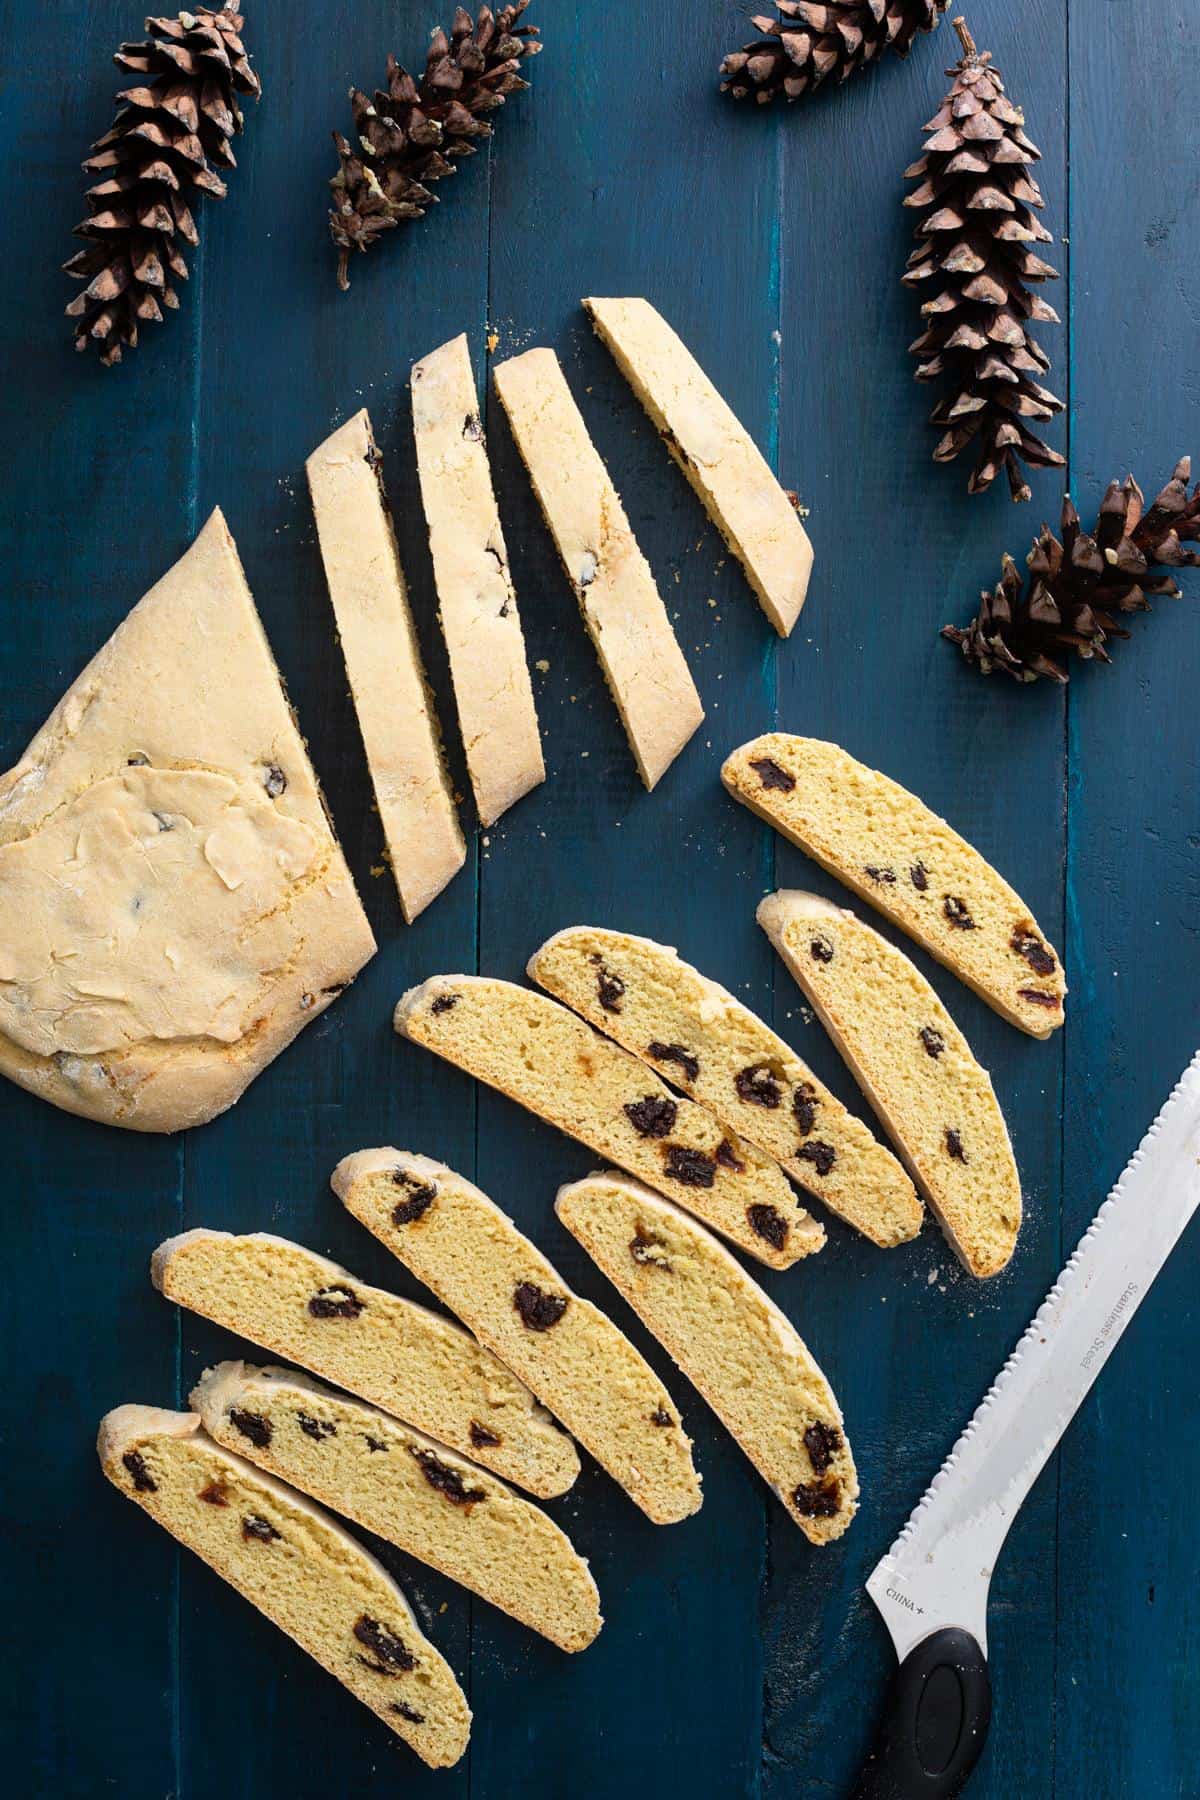 biscotti dough cut into pieces before baking for a second time